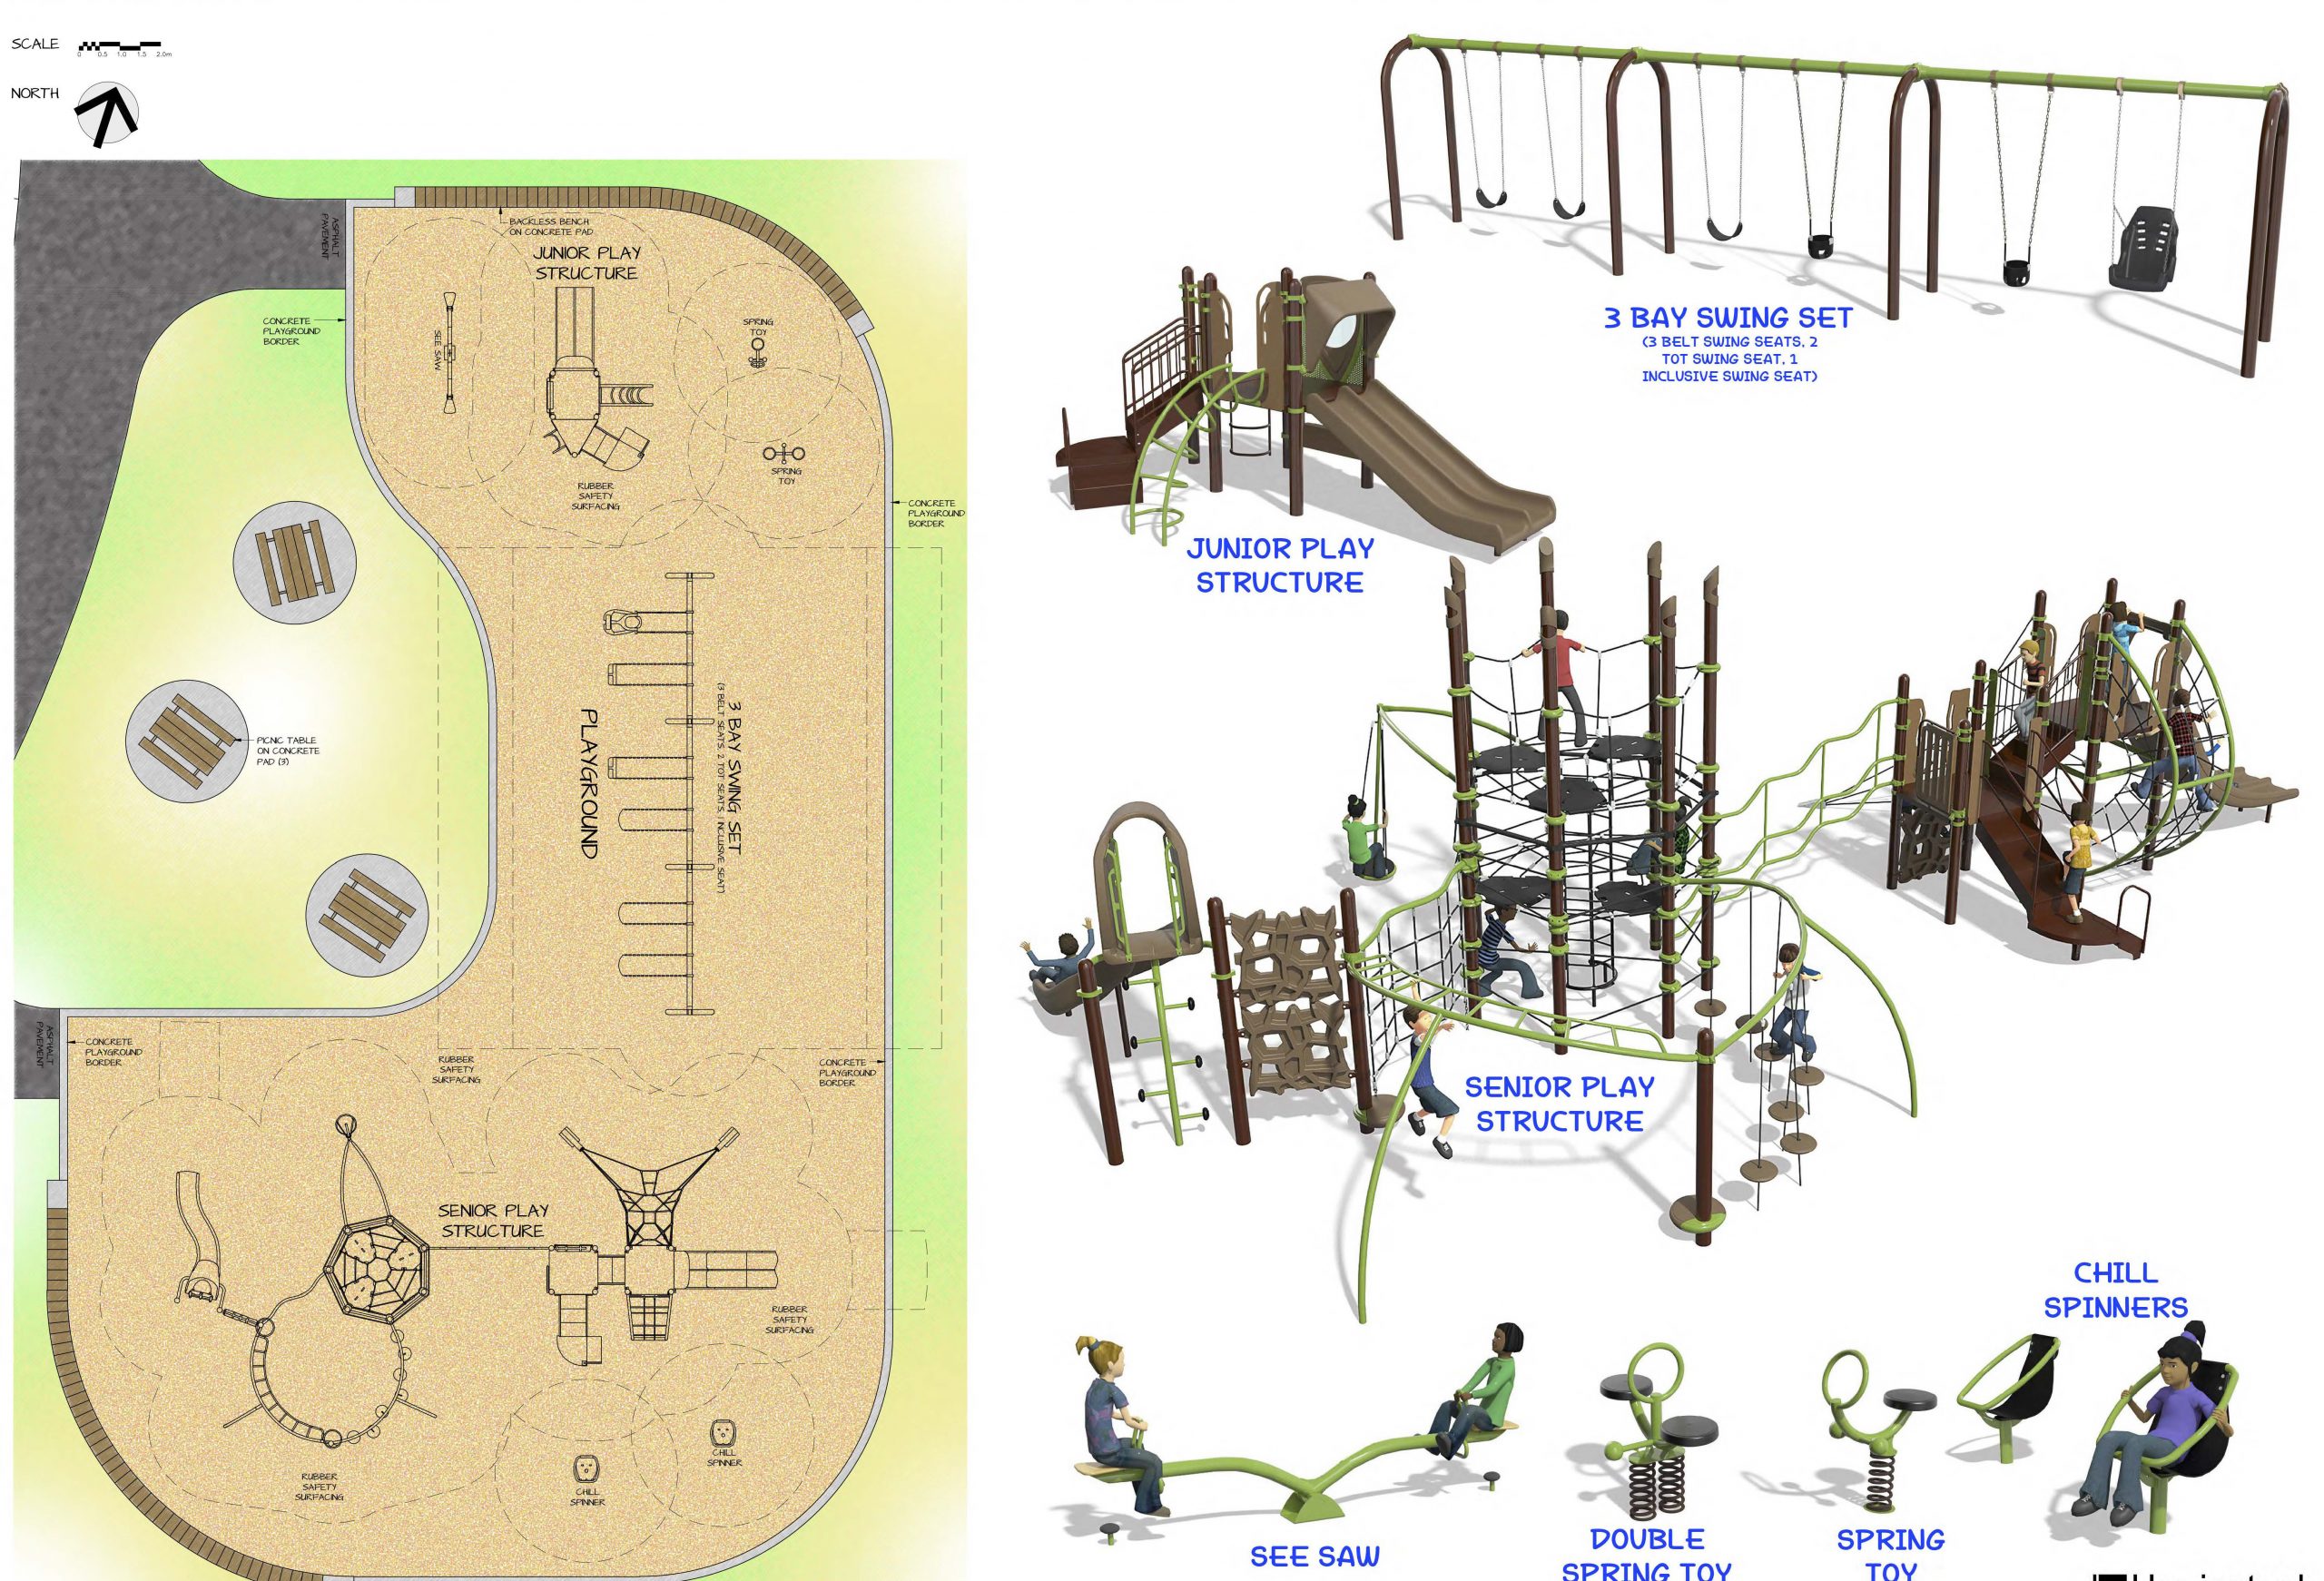 The playground is situated in the eastern area of the park, setback from the property boundaries to preserve existing trees. There is lawn space north and west of the playground for leisure activities and casual play. A picnic area is integrated with the playground for family enjoyment. Play equipment is provided for age groups 2 -5 and for 5 – 12 years old. The playground incorporates accessible play opportunities, and includes a rubber surface. The wading pool is removed from this area. A splash pad feature was not supported in the survey, and has not been provided.